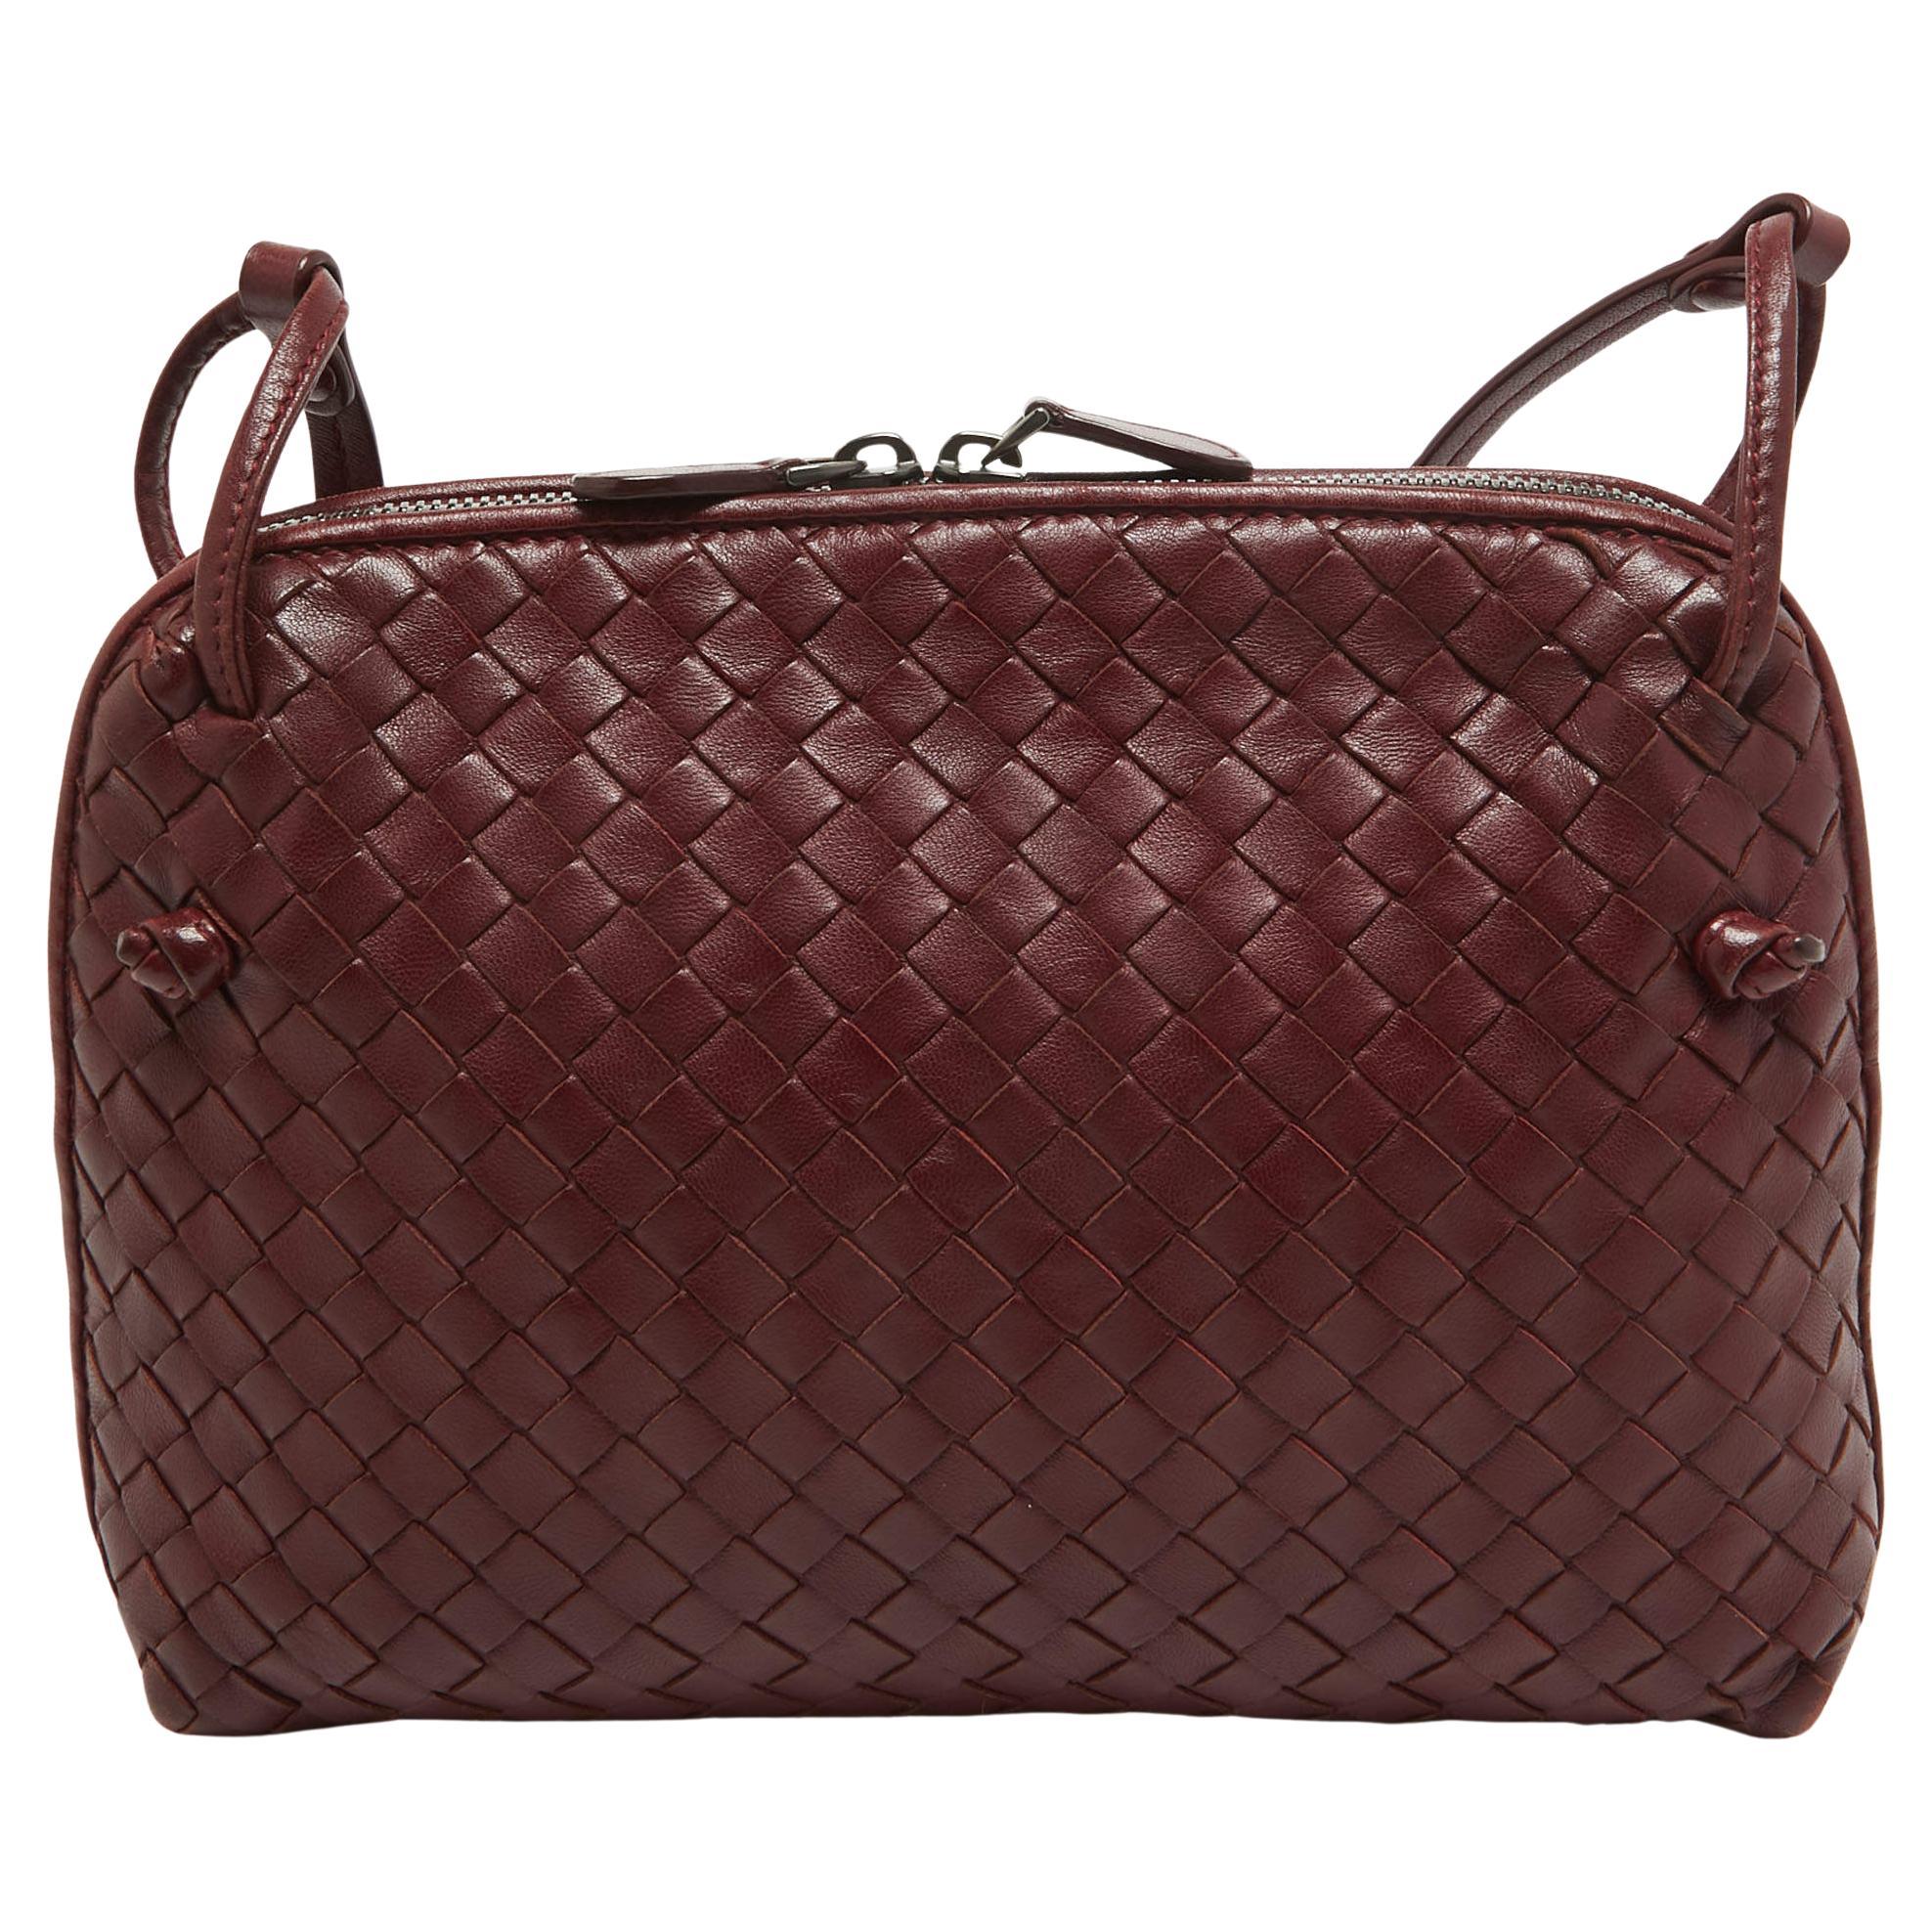 Designed to be durable, this lovely Nodini crossbody bag is a prized buy. Chic and easy to carry, the Bottega Veneta creation comes with a long shoulder strap and a spacious interior to keep your essentials safe.

